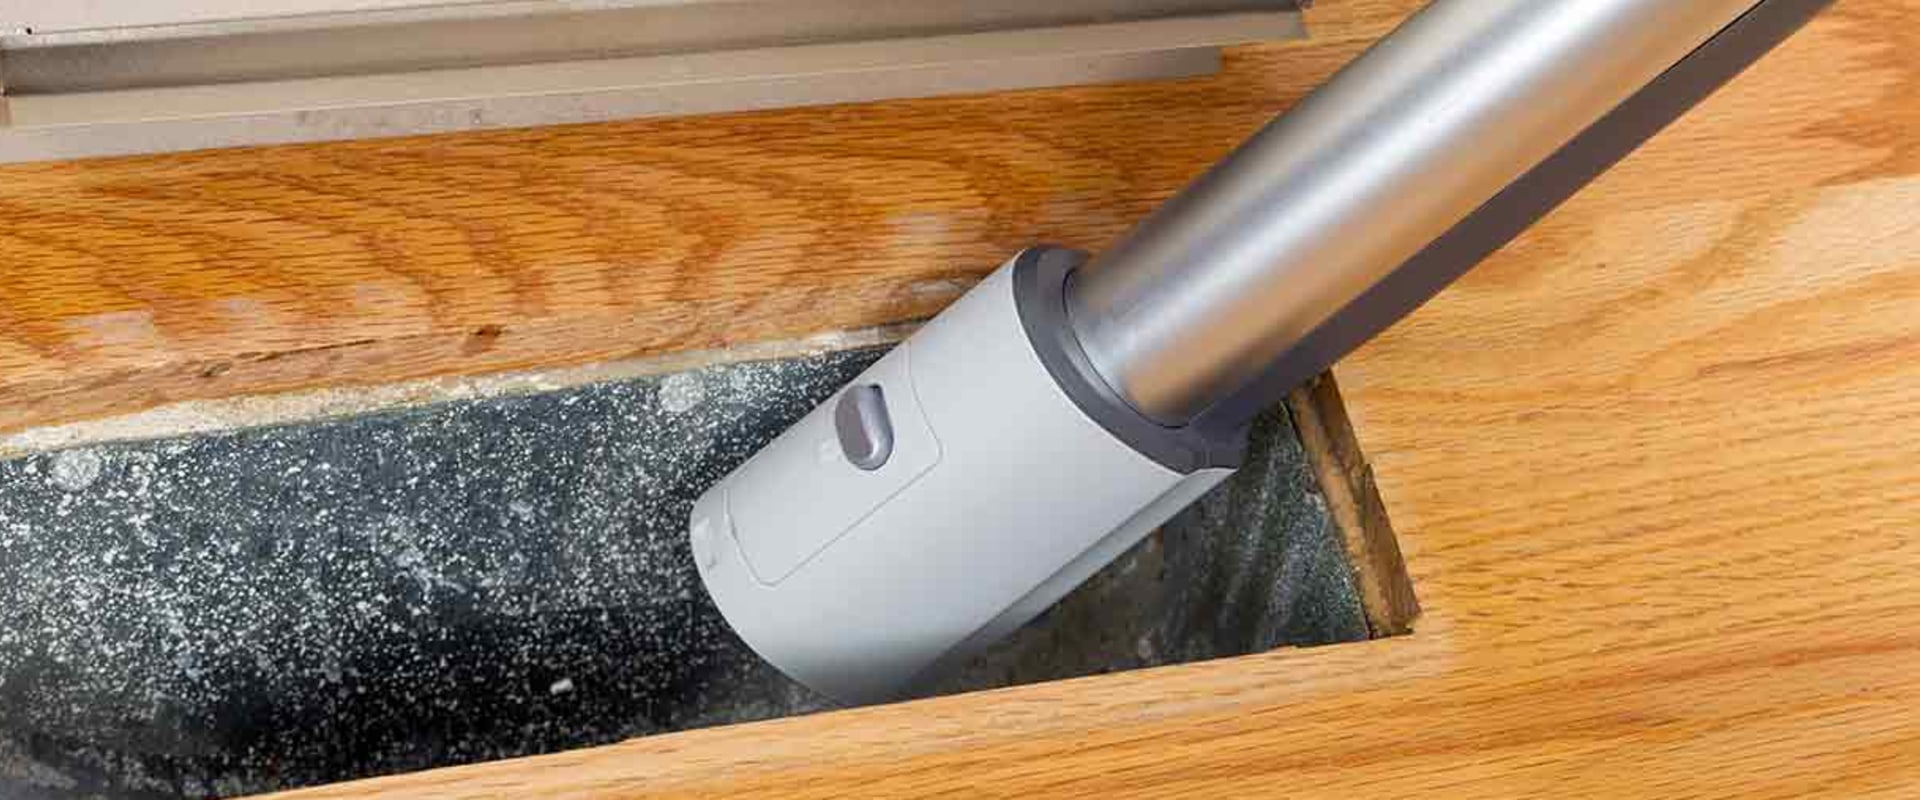 Is Cleaning Vents a Good Idea? An Expert's Perspective